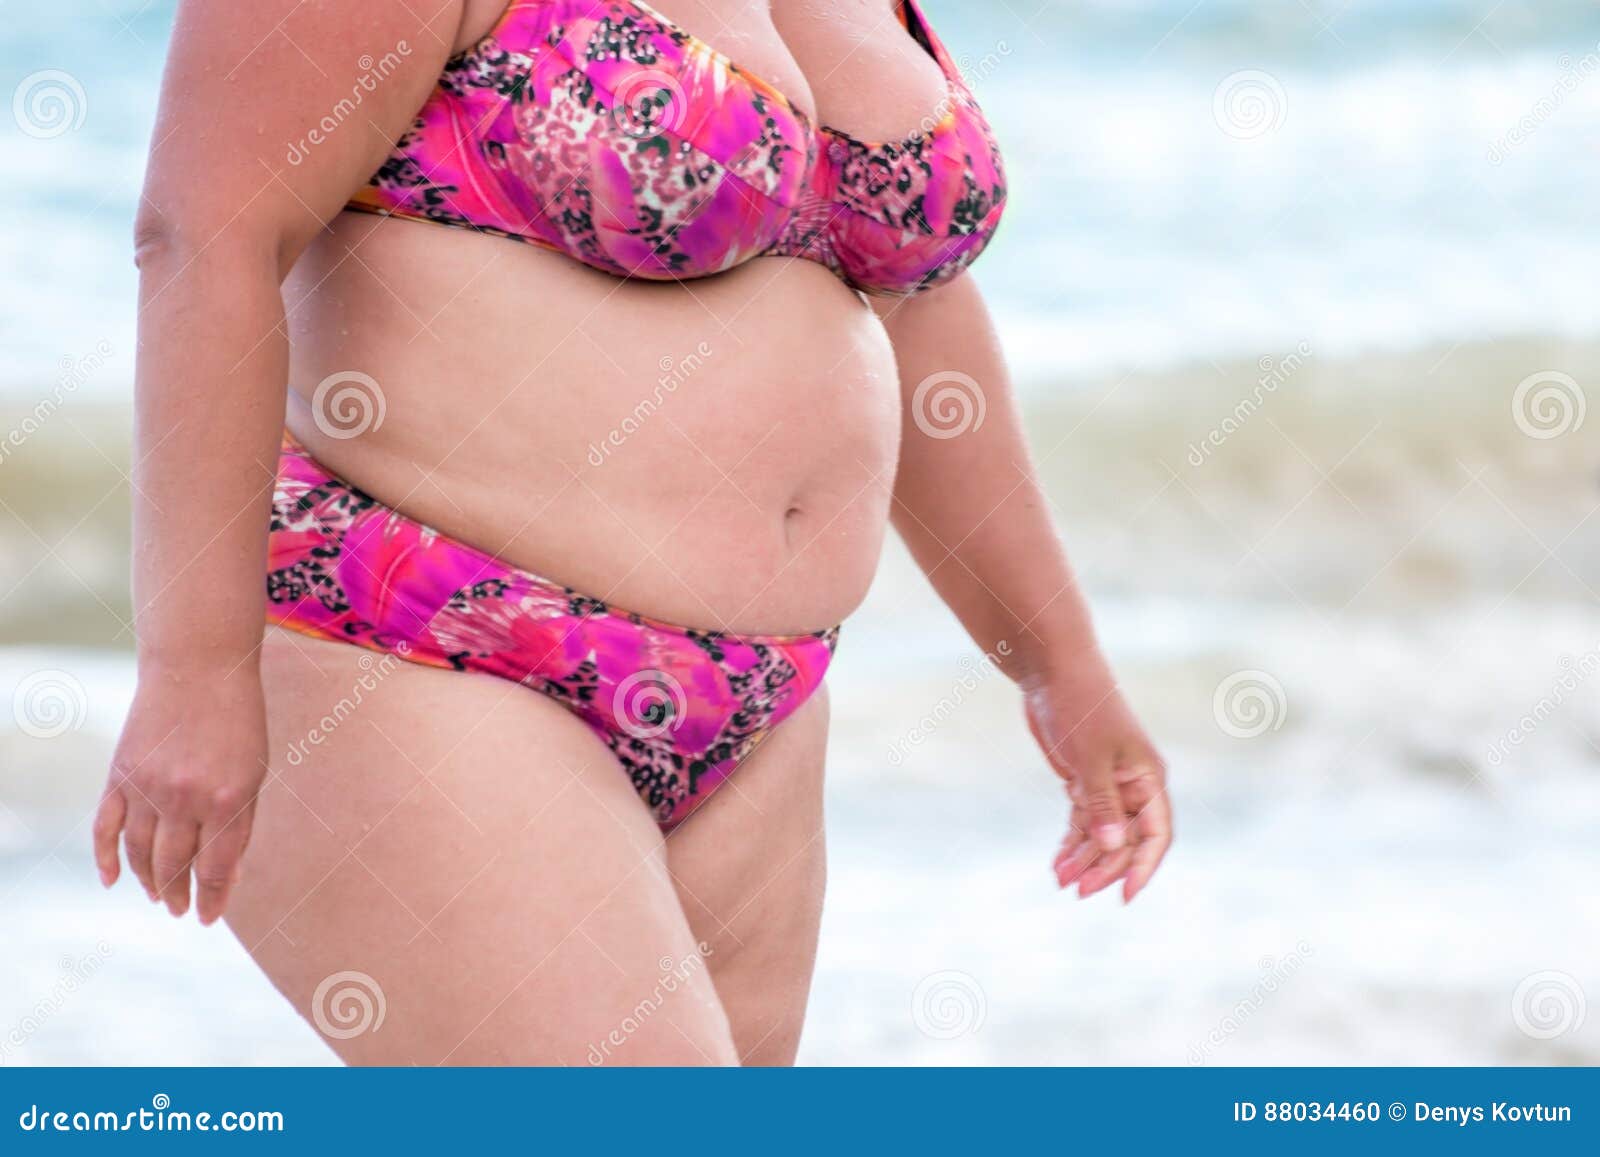 515 Obese Woman Swimsuit Stock Photos